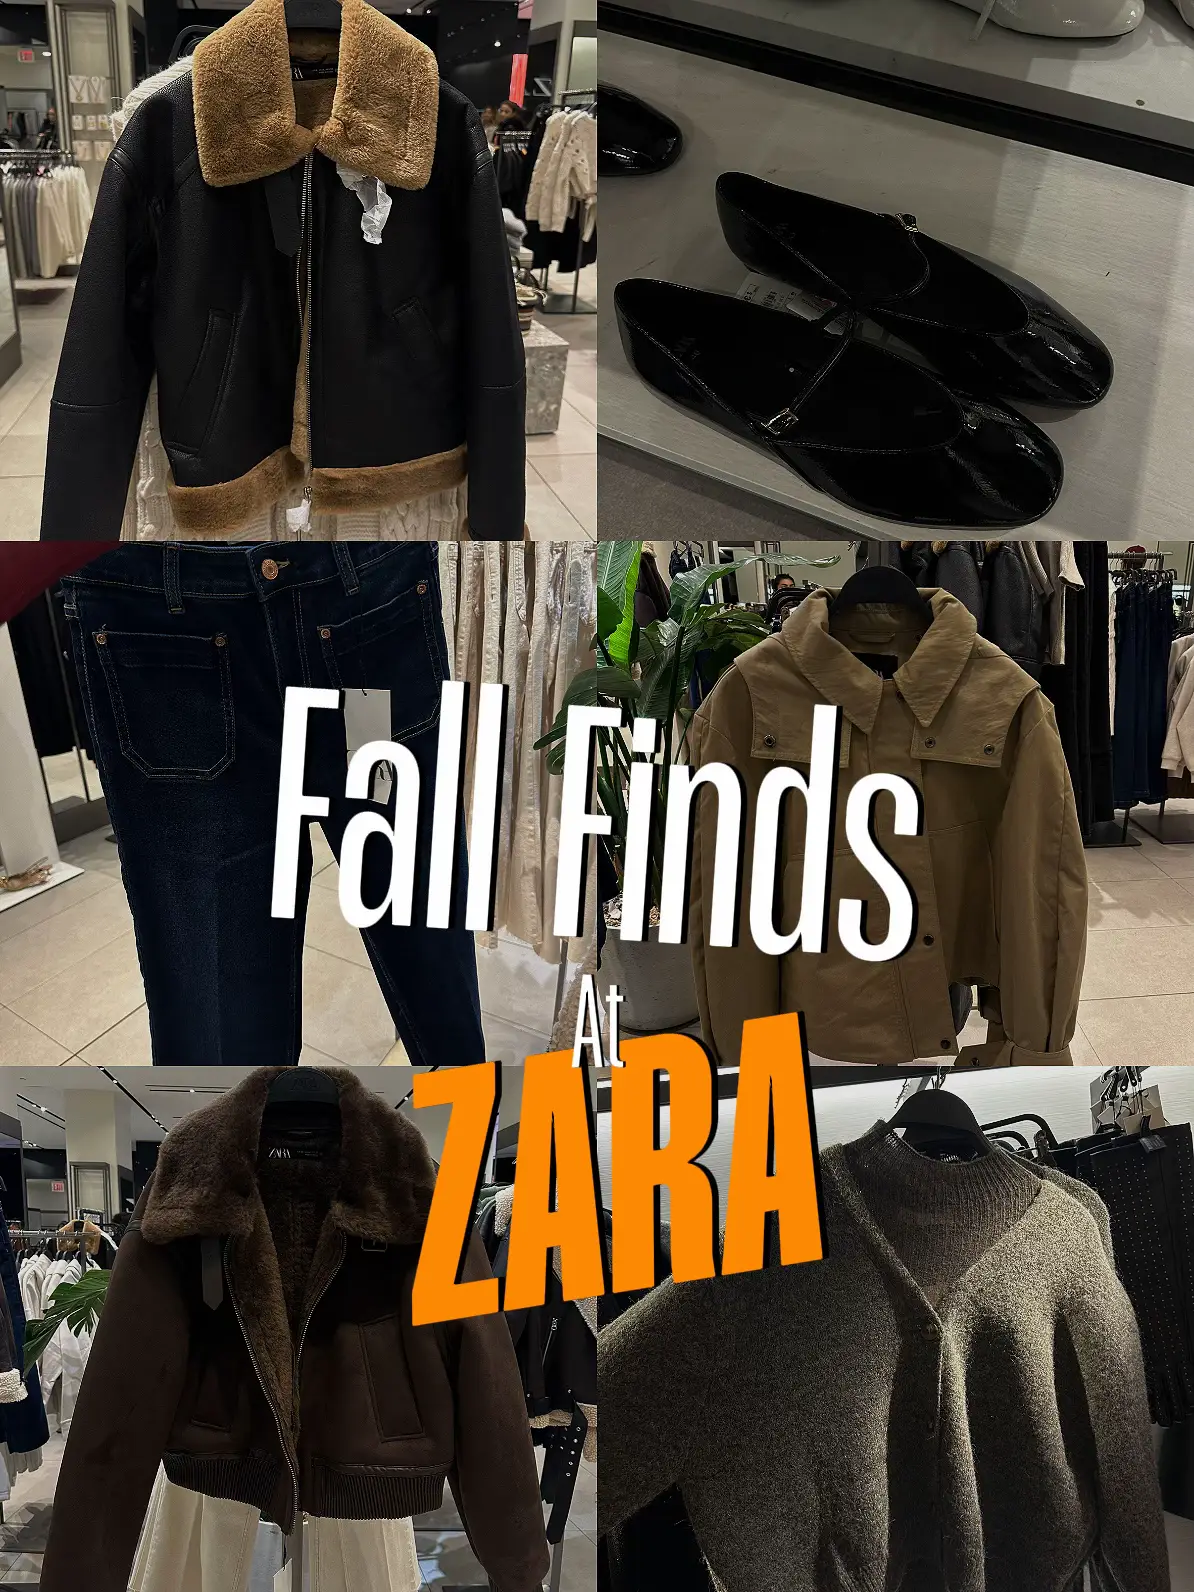 ZARA FALL 2023  try on haul + fall outfits 🍂 